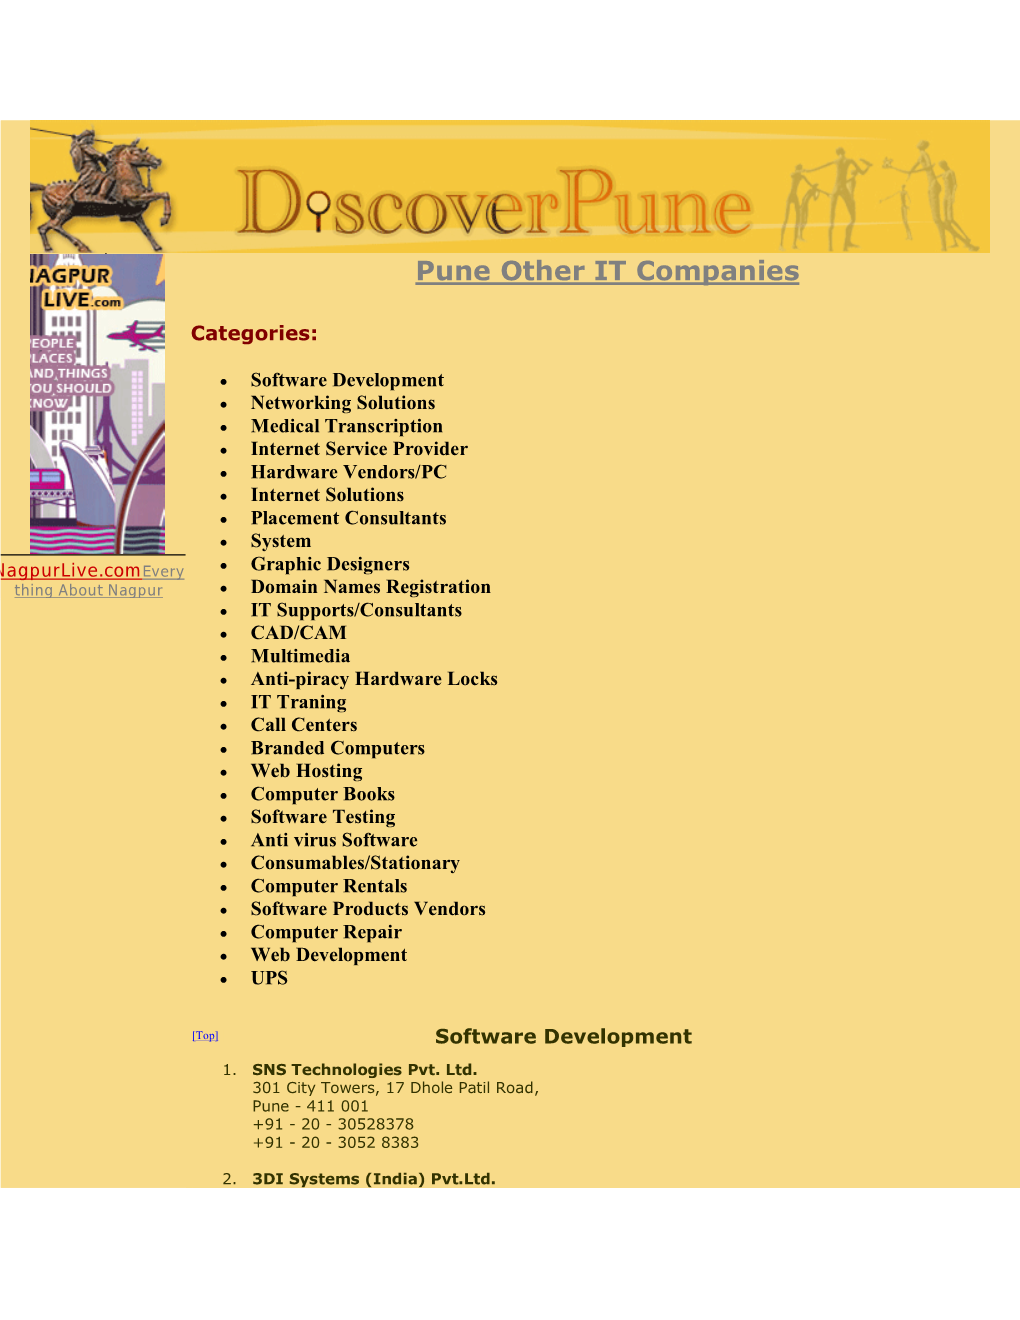 Pune Other IT Companies